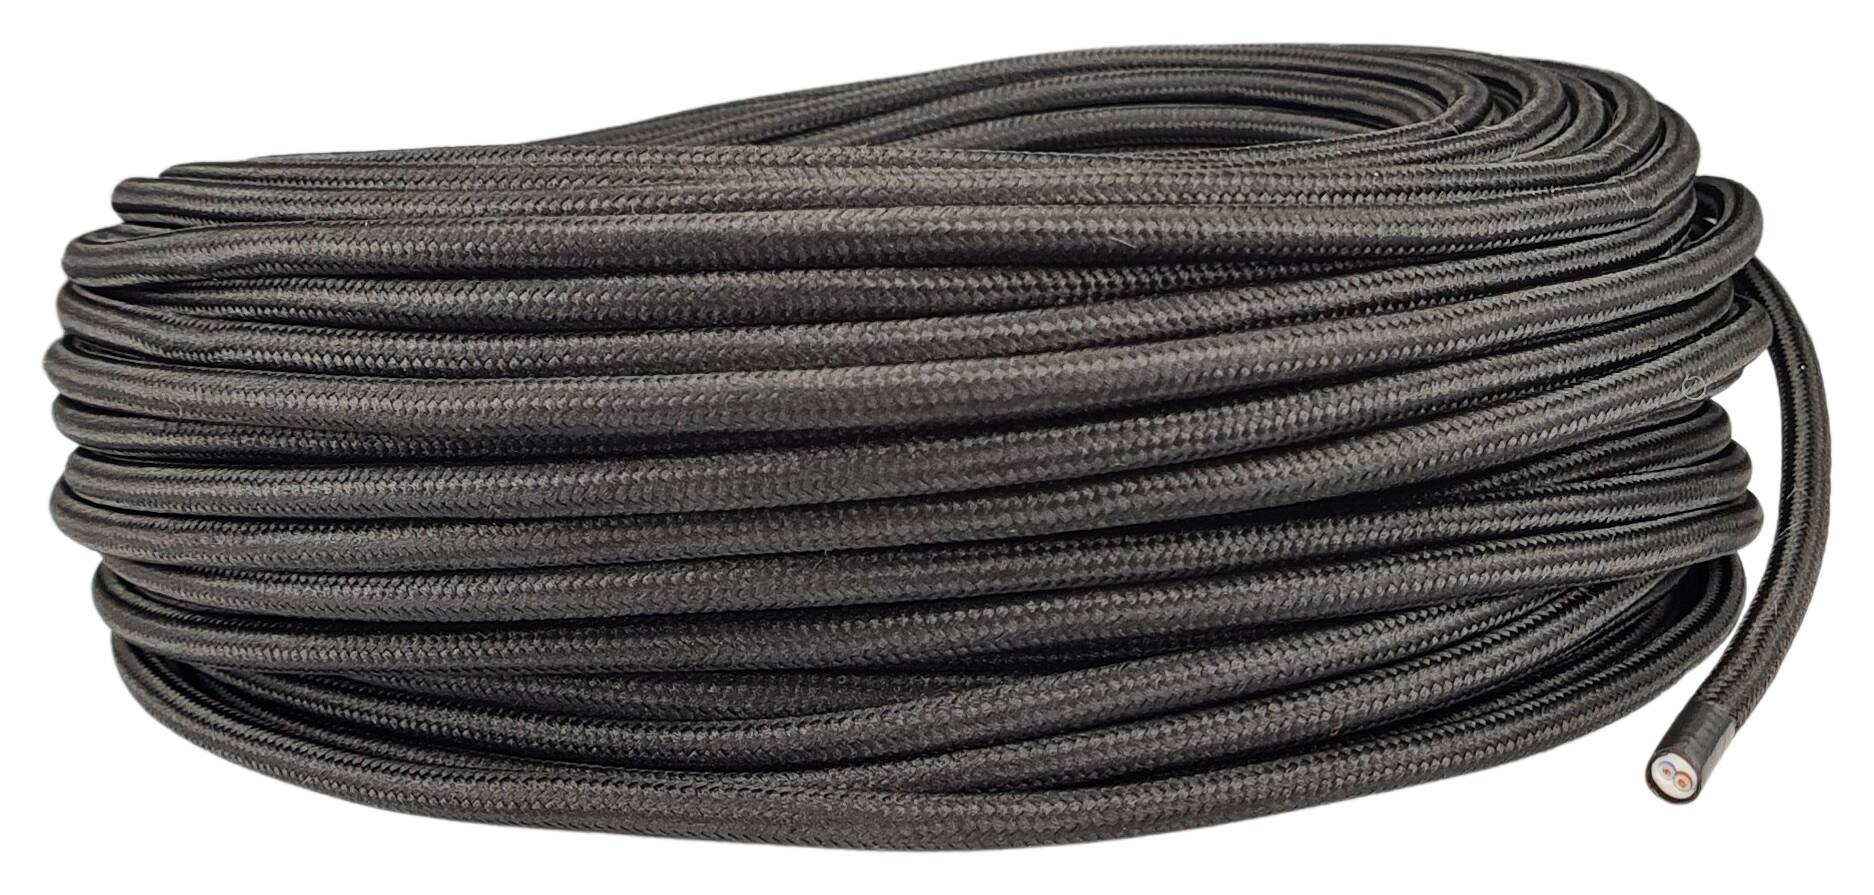 cable 2x 0,75 H03VV-F textile braided RAL 9005 black